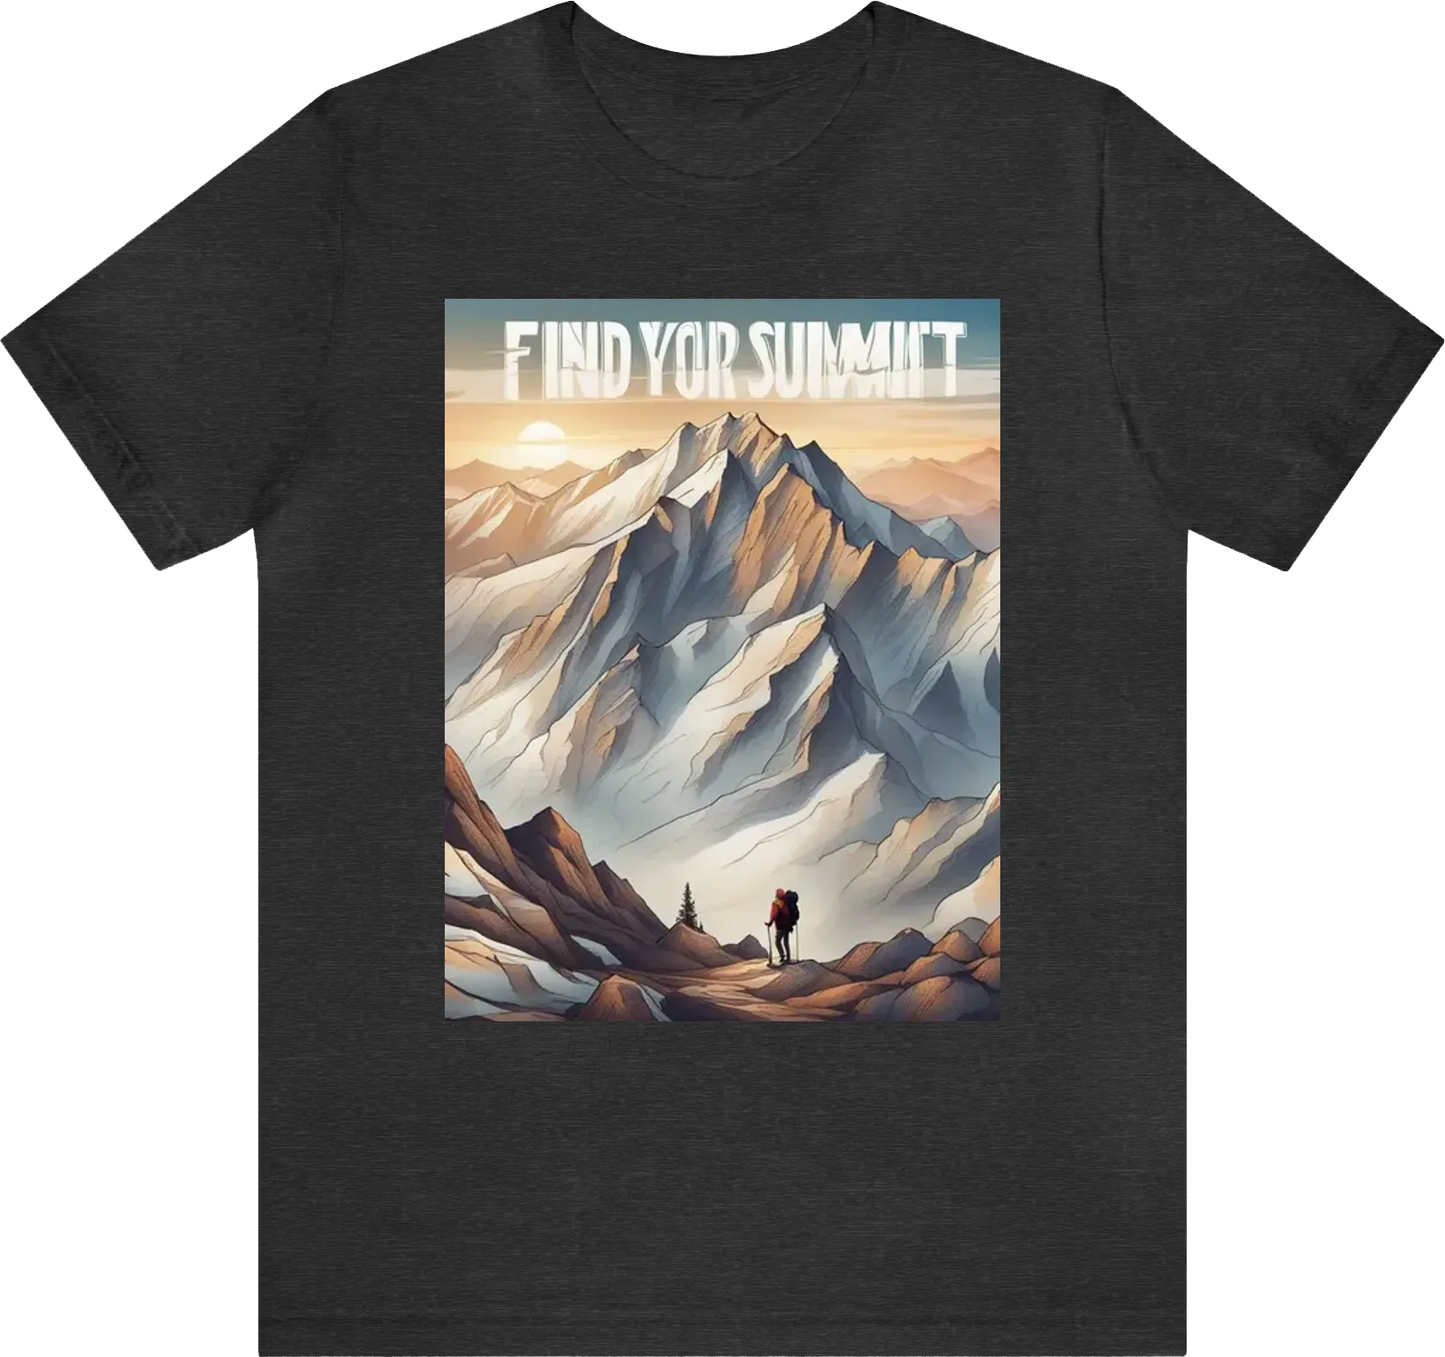 featuring a breathtaking mountain range with the caption "Find Your Summit" for adventurous hikers and climbers.